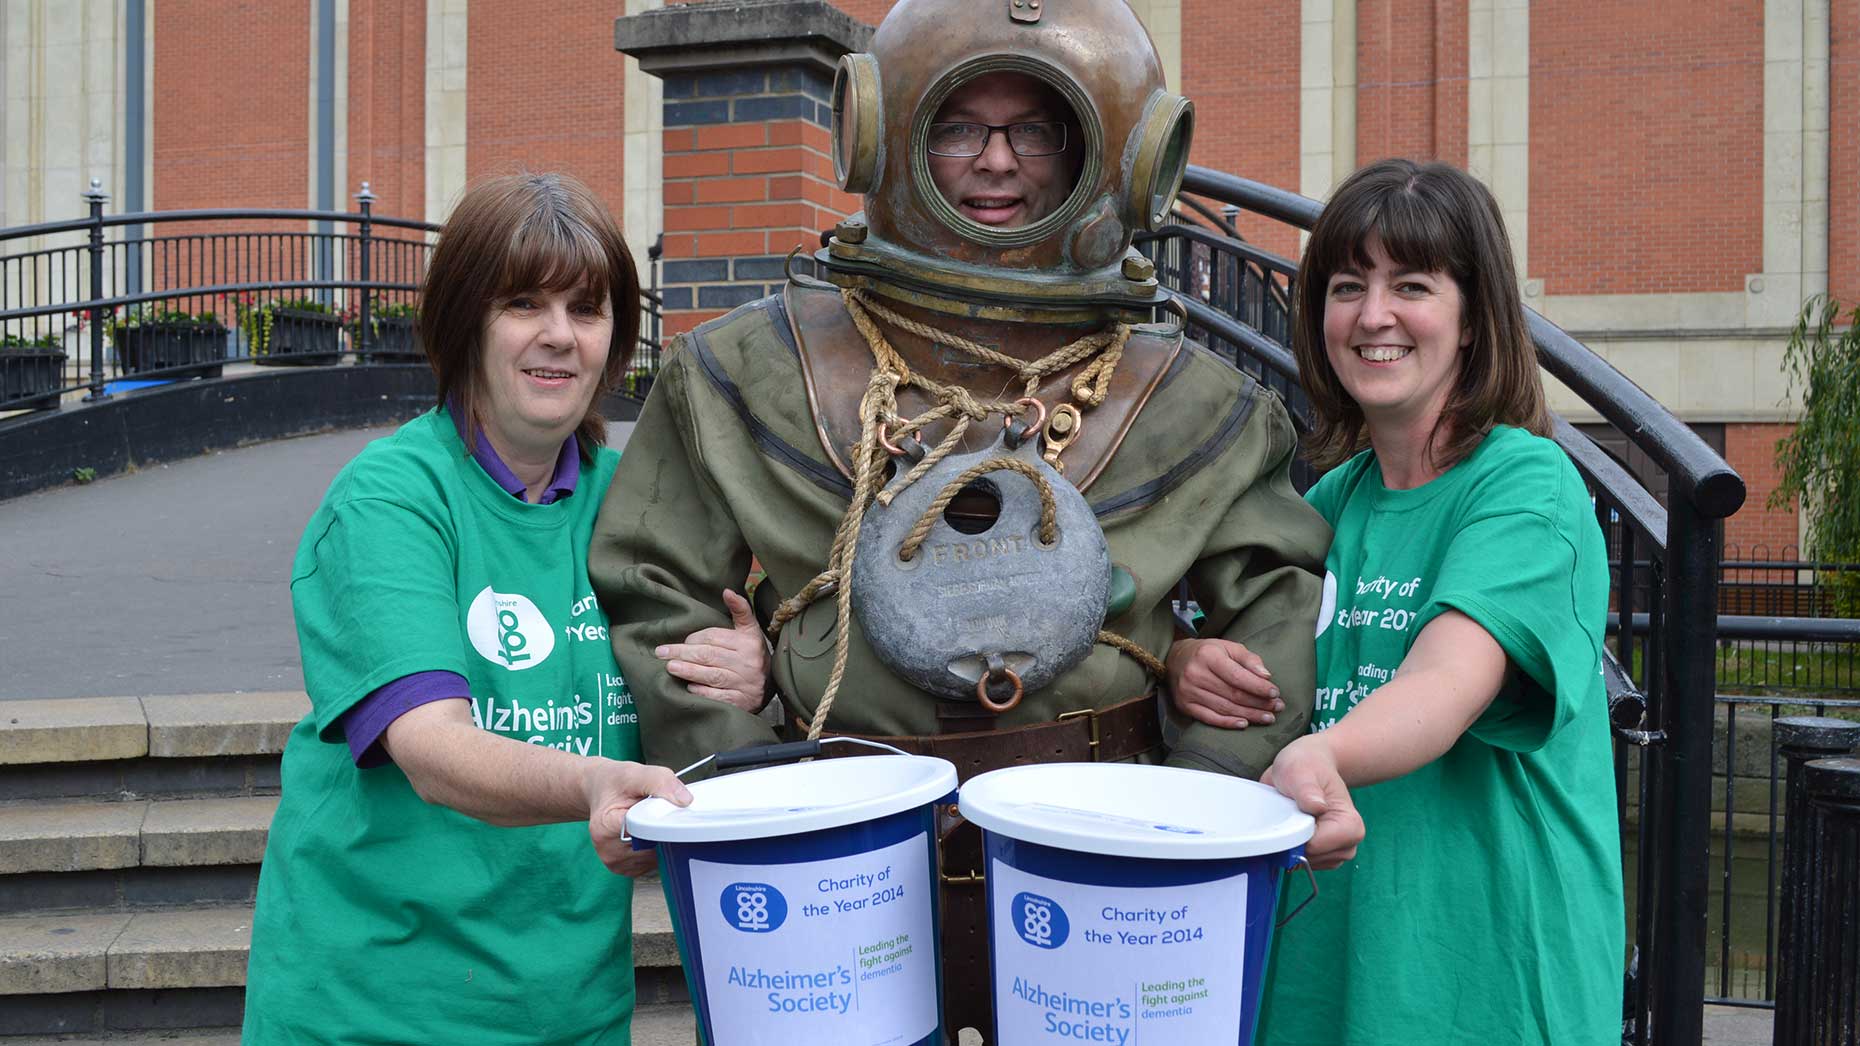 Lincolnshire Co-op Customer Sales Assistant Jayne McDougall, City Square Food Store Manager Phil Goddard and Lincolnshire Co-op’s City Square Coffee Shop Manager Debbie Wright (who owns the diving suit). Photo: Lincolnshire Co-op